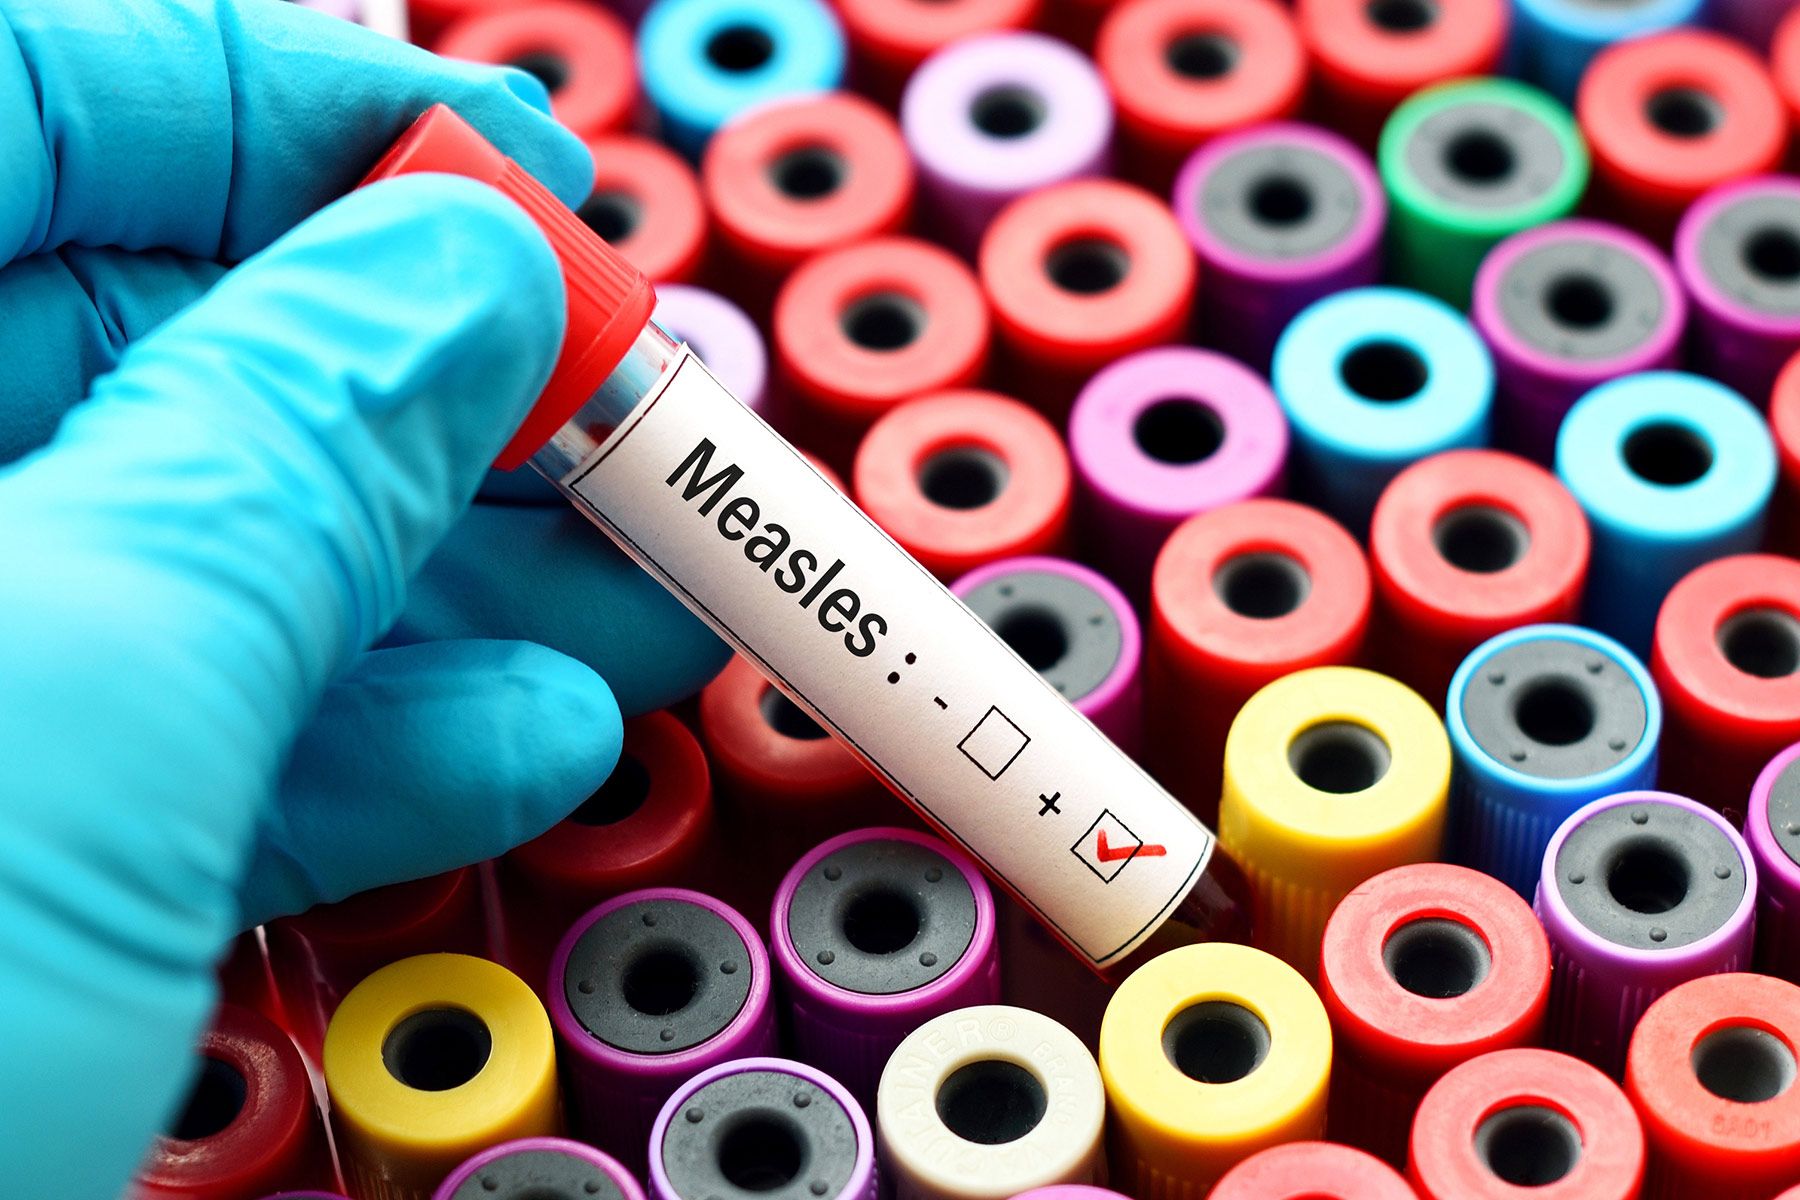 WHO, UNICEF Warn About Increased Risk of Measles Outbreaks